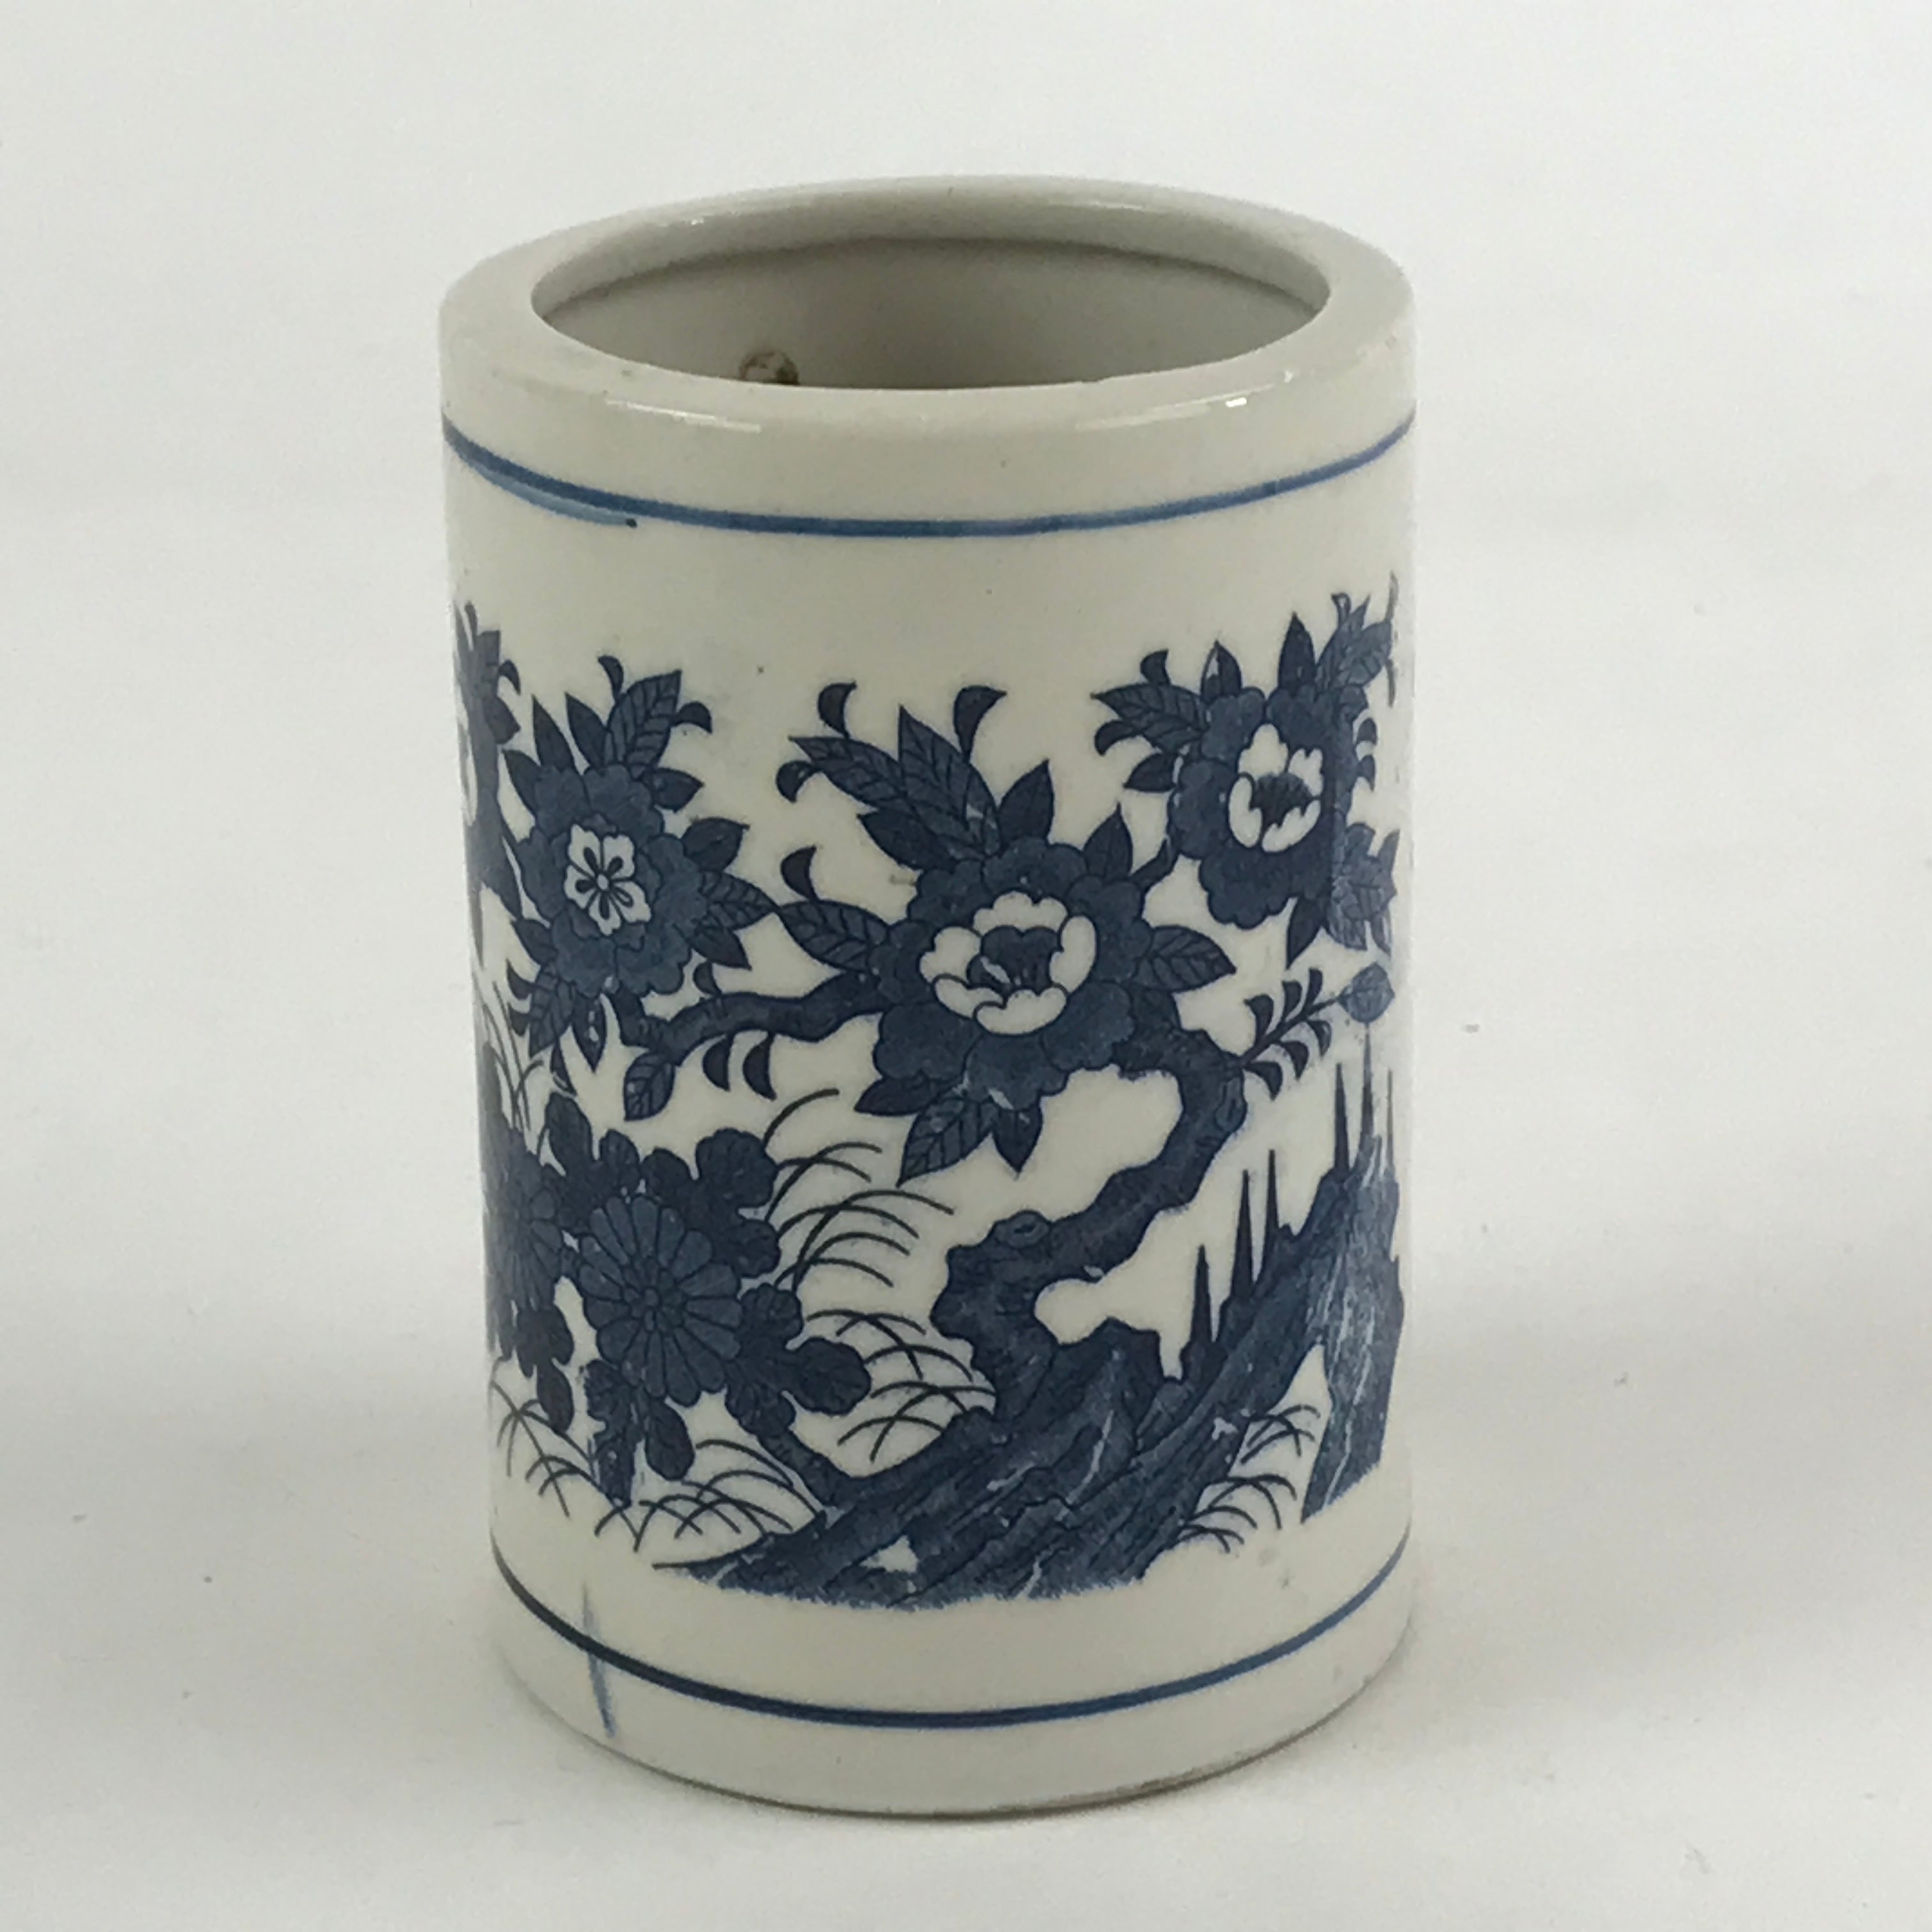 Blue and White Chinoiserie Ceramic Coasters with Holder, Decorative Object